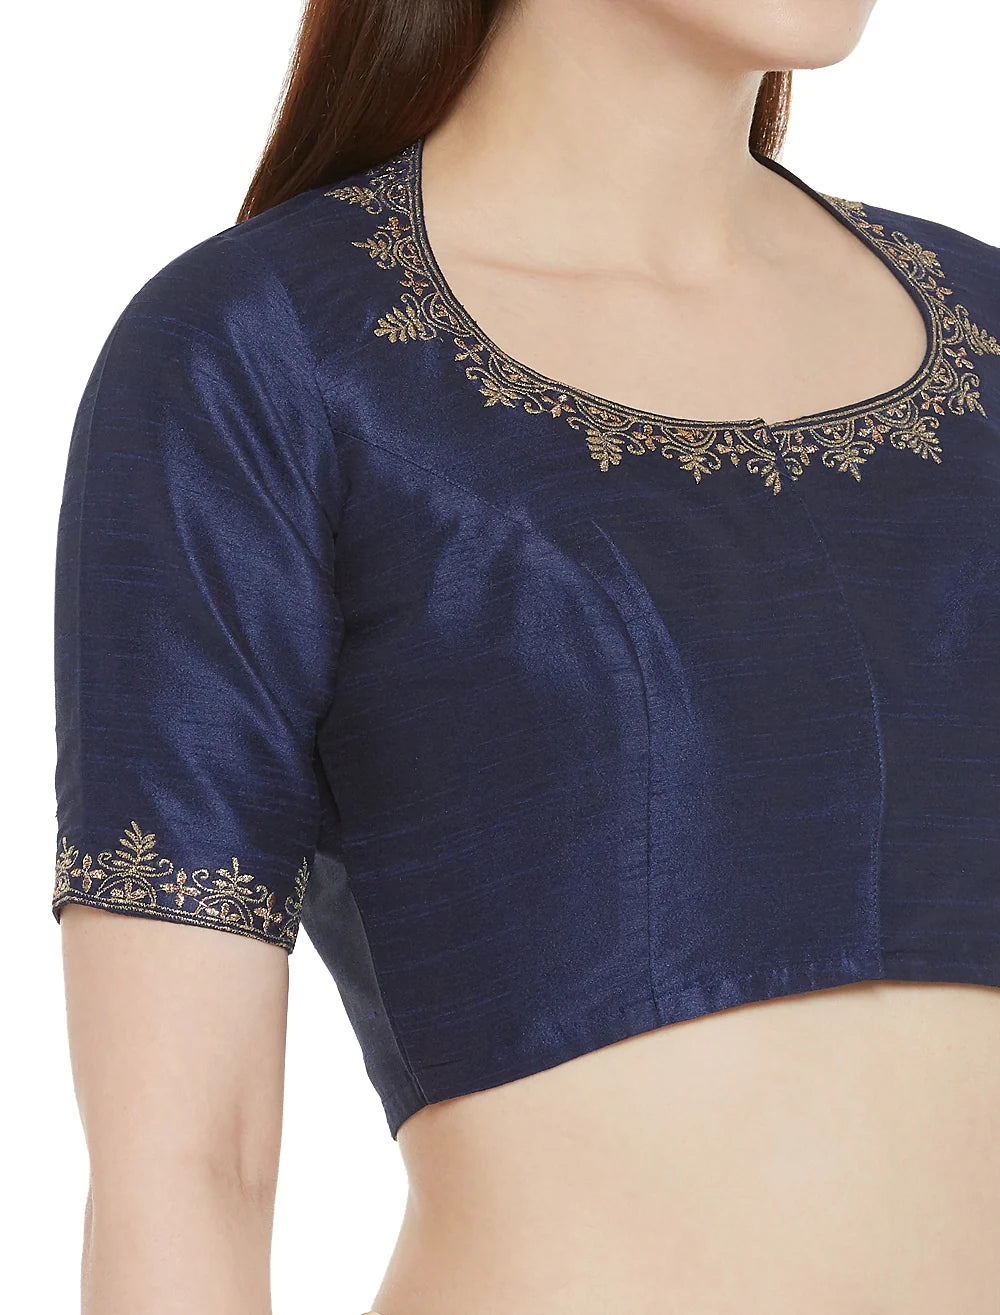 Embroidered Polyester Saree Blouse with Matka Neckline - Navy Blue